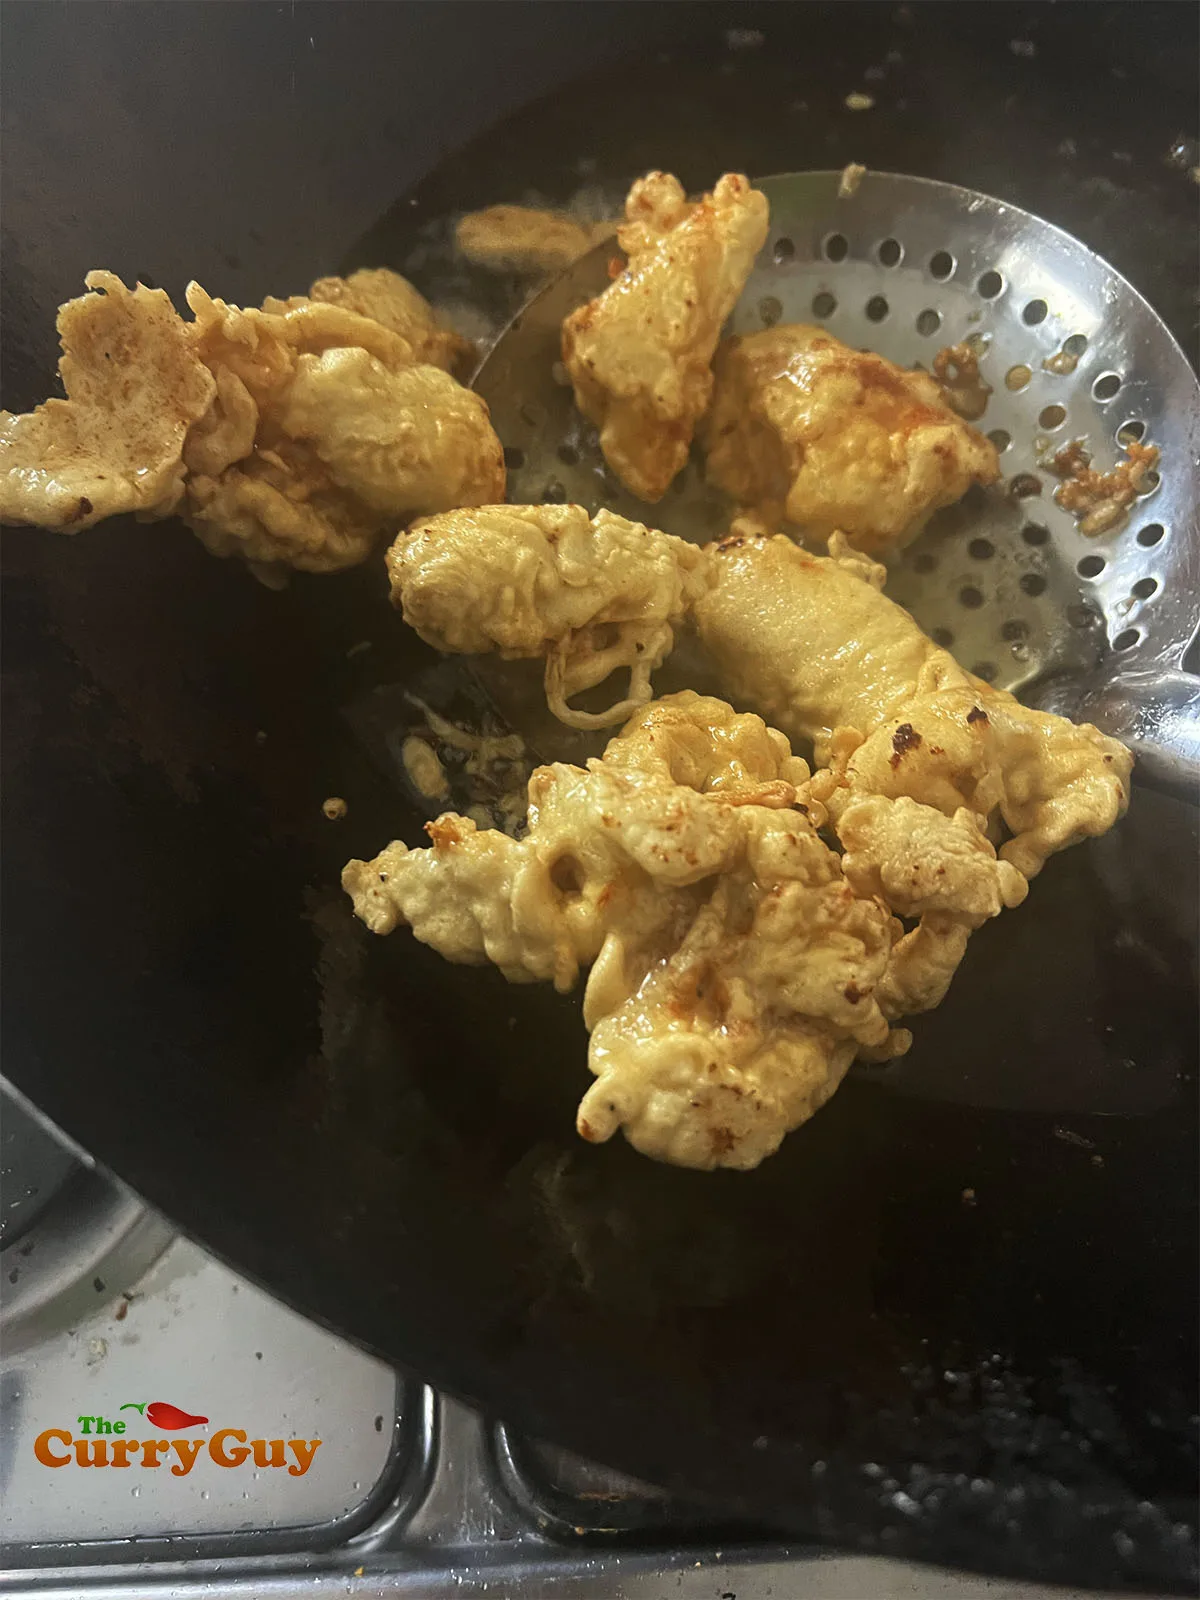 Frying the chicken